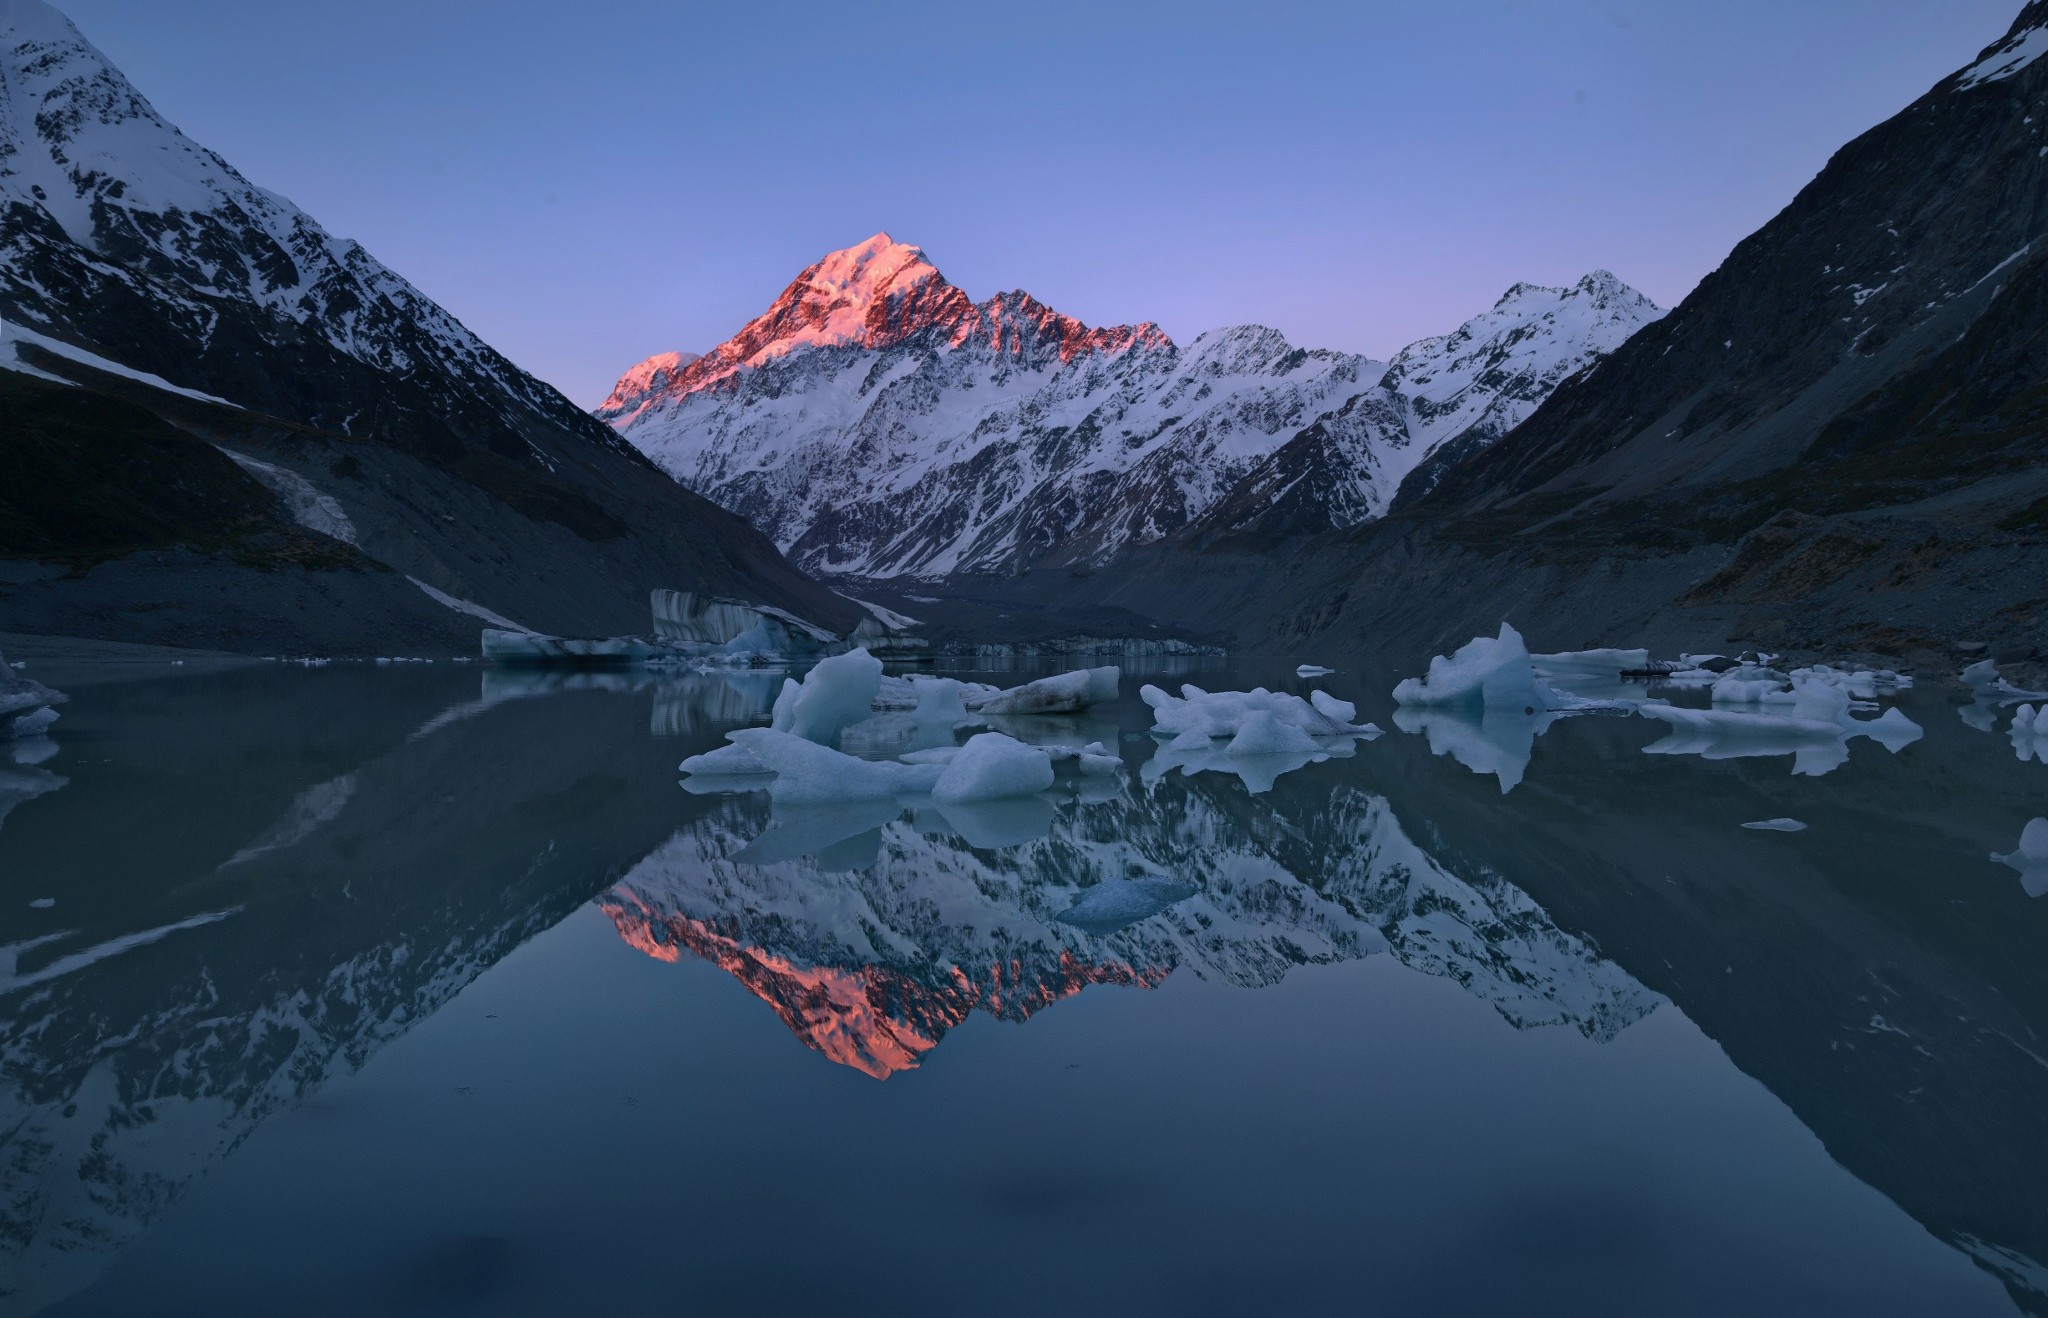 General 2048x1318 lake landscape New Zealand snowy mountain ice mountains Mt Cook nature reflection cold outdoors Mount Cook